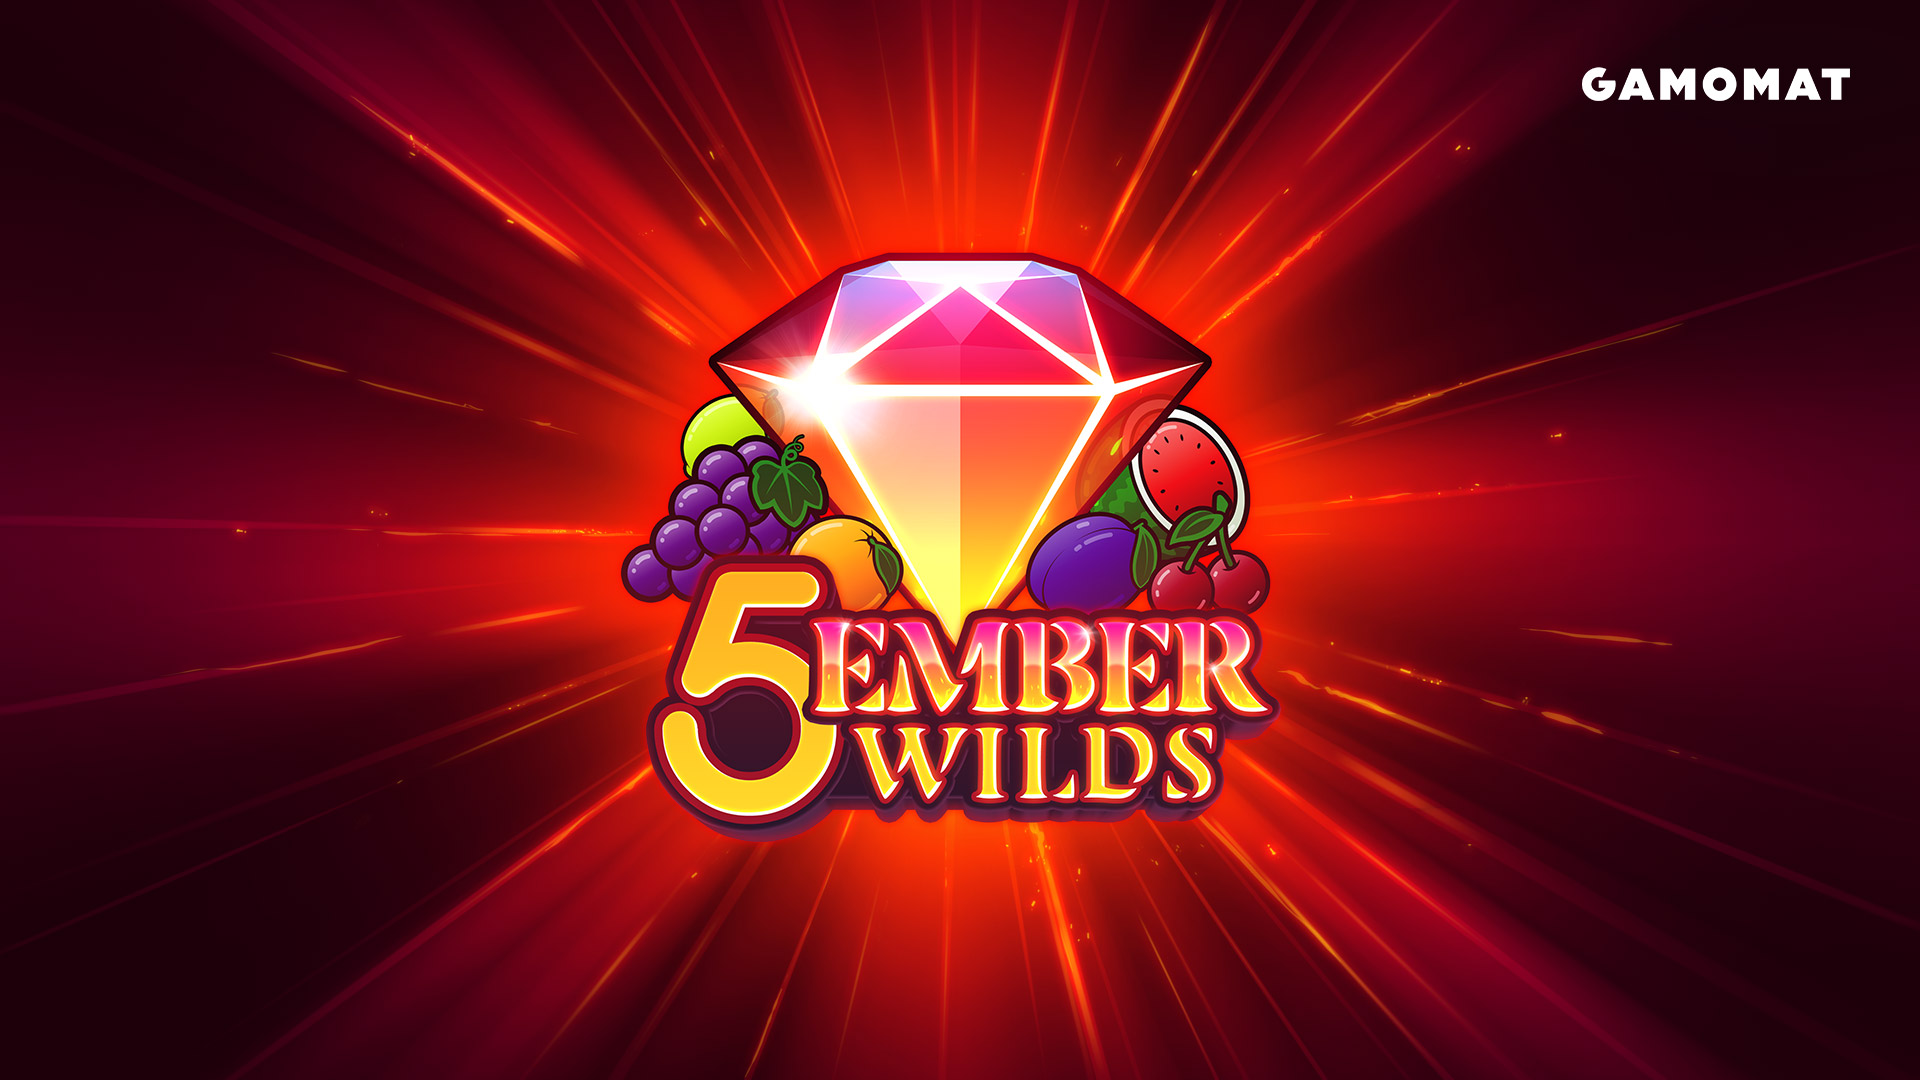 GAMOMAT sparks joy with 5 Ember Wilds release